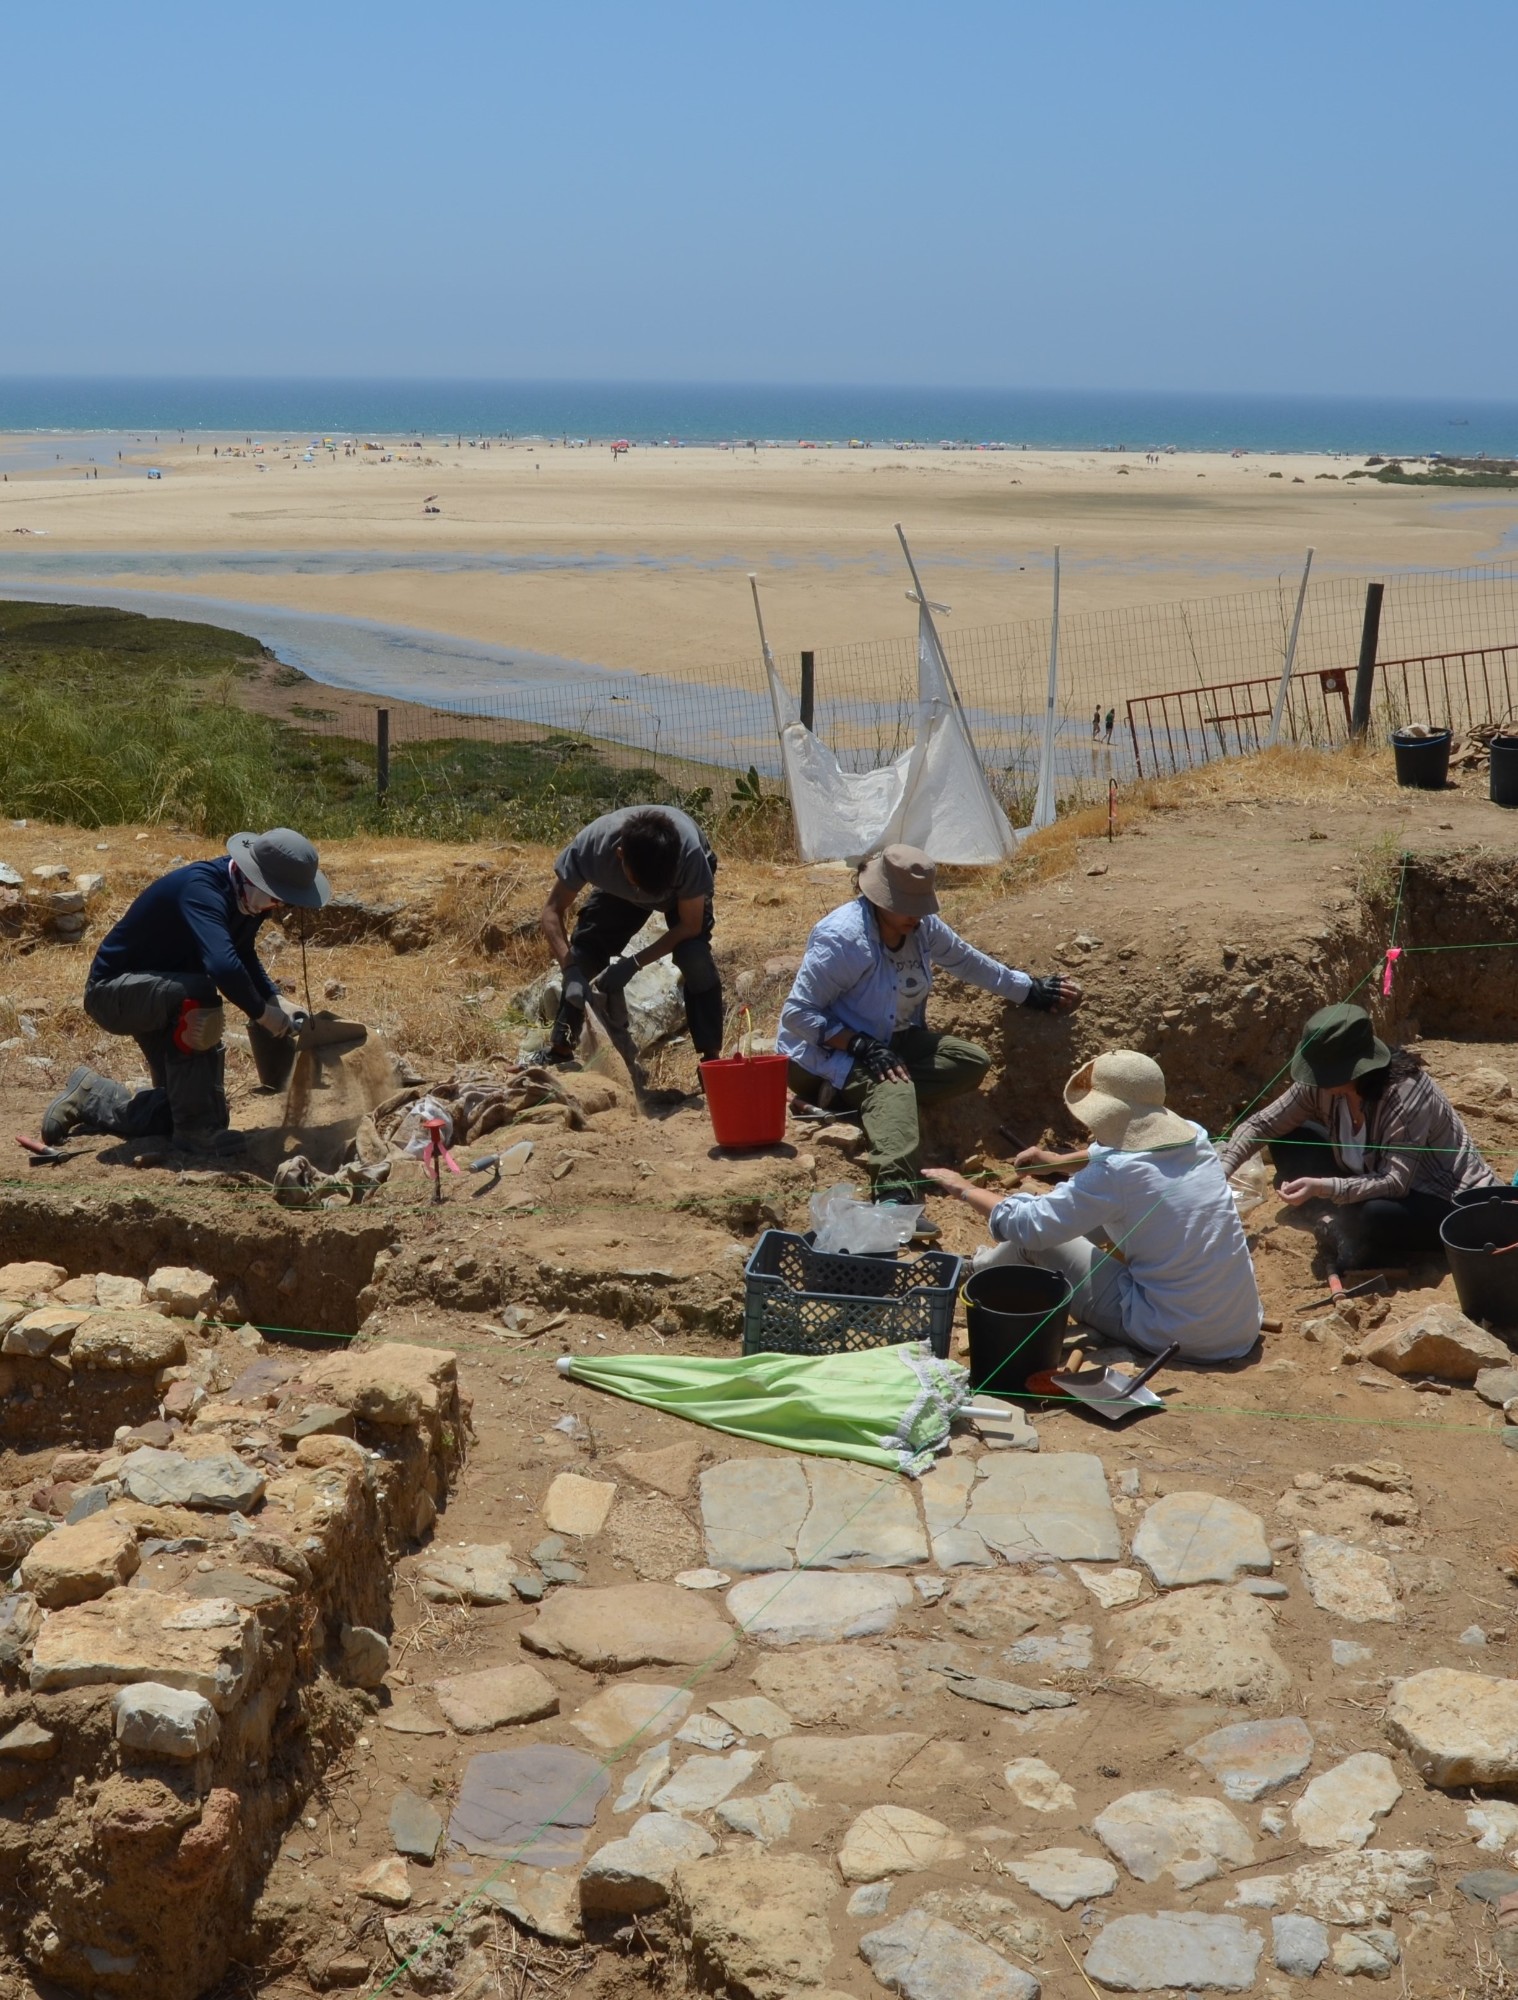 Cacale Velha village dig site with cobblestones, Algarve coast in the background